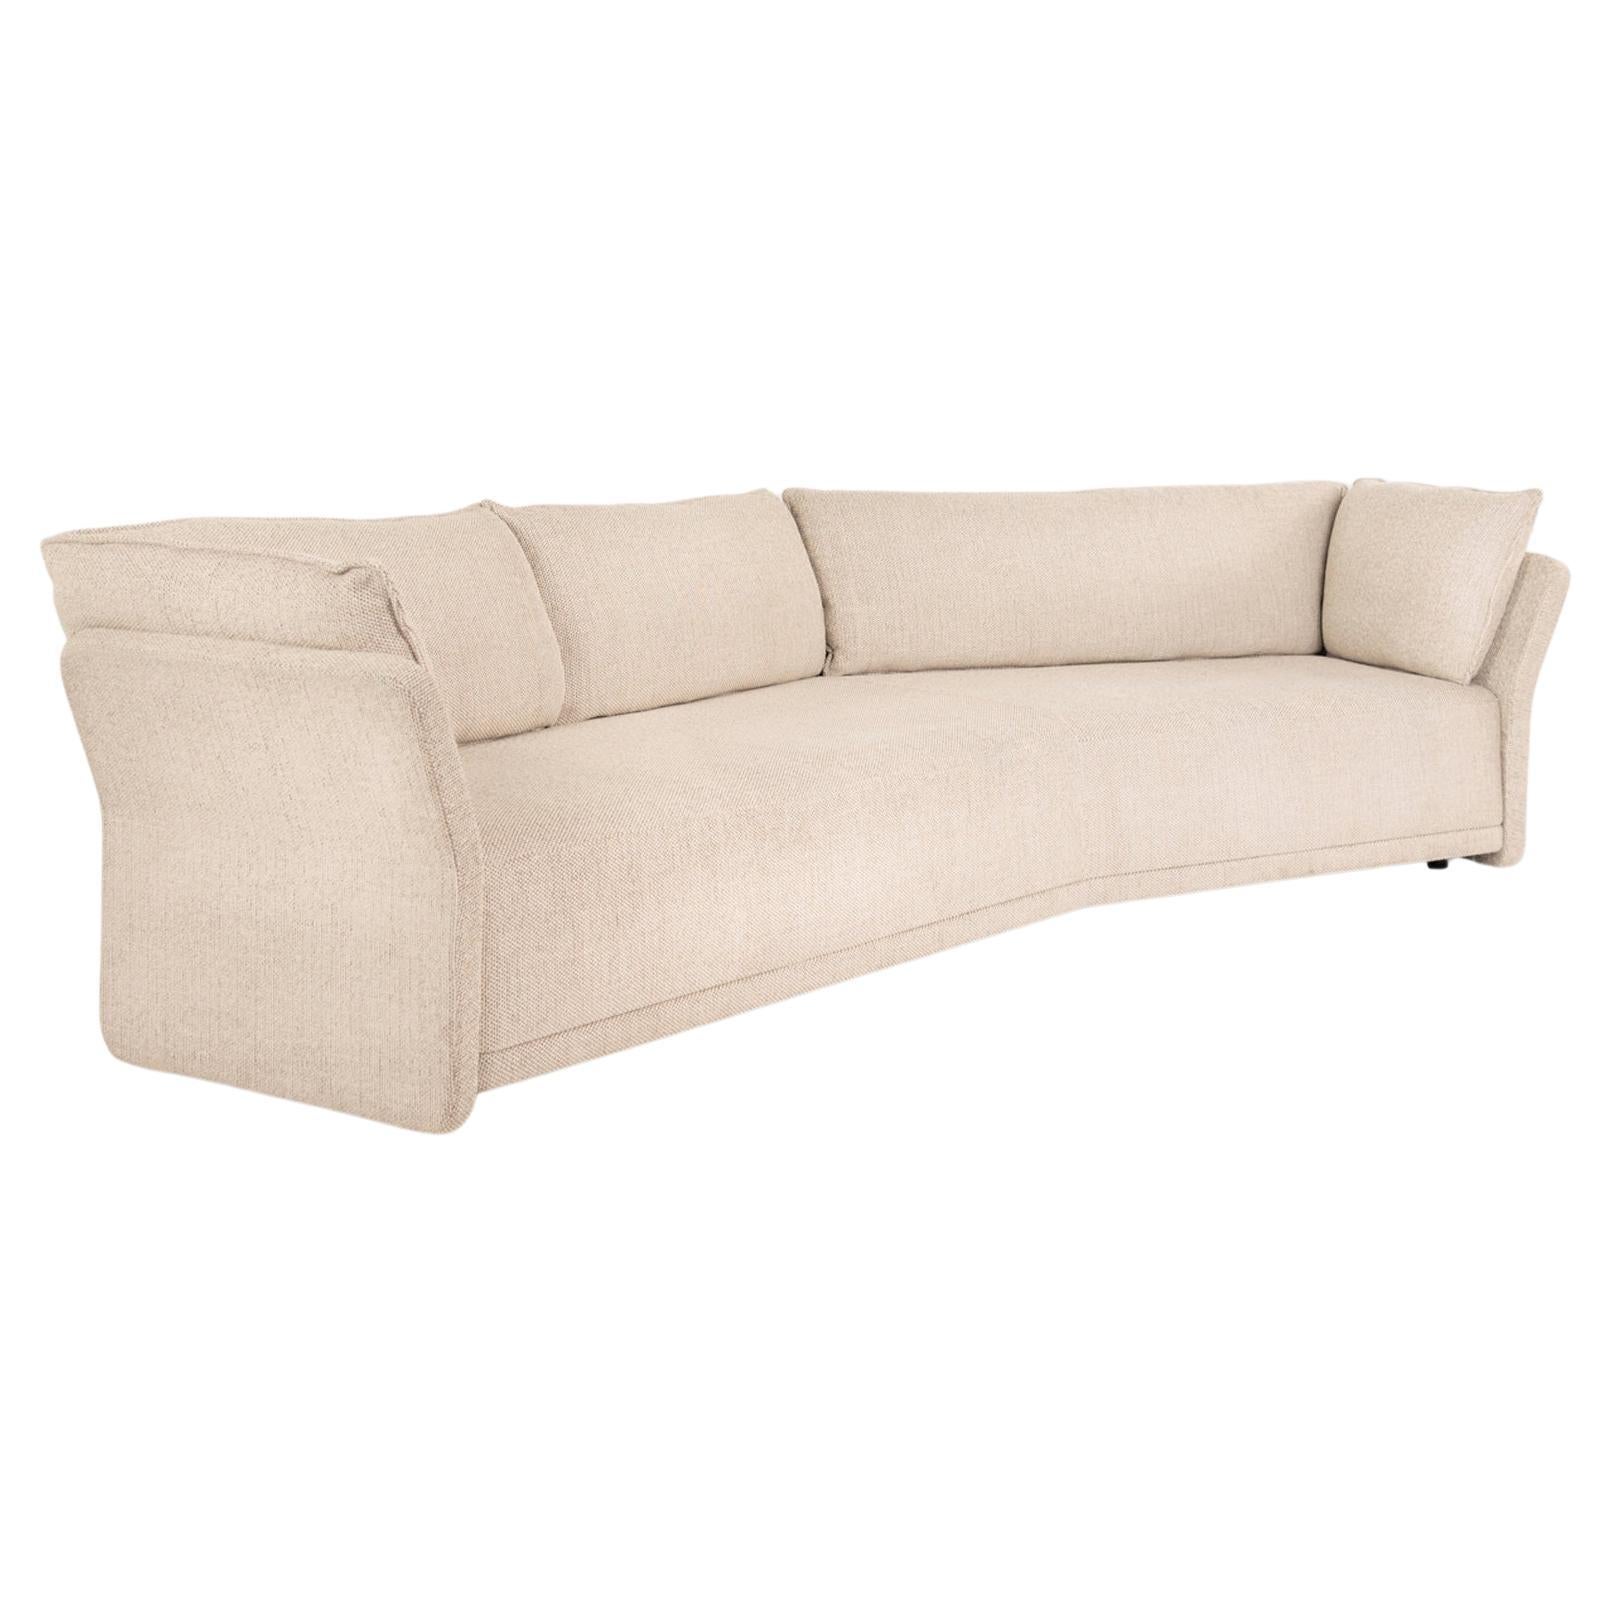 Rue de Babylone Angled Sofa by Christophe Delcourt For Sale